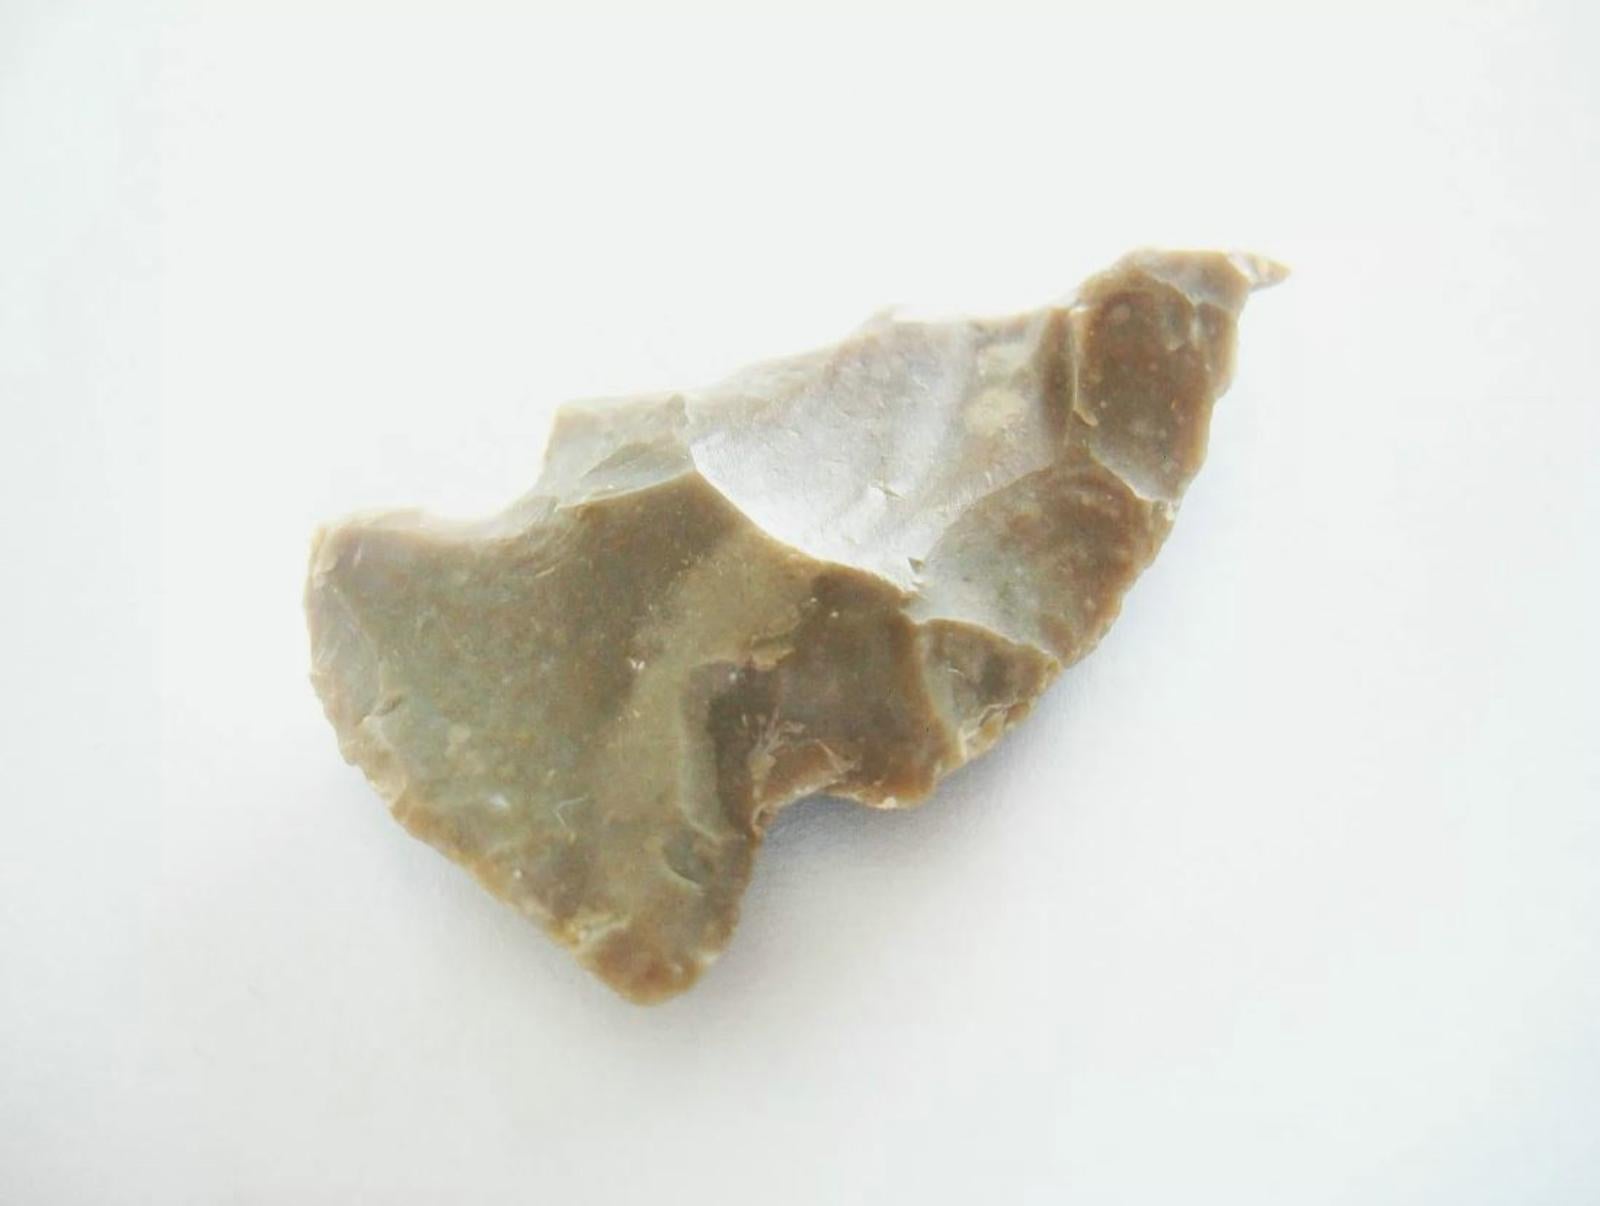 Native American ARROWHEAD - Canadian First Nations Stone Projectile/Pendant - 2